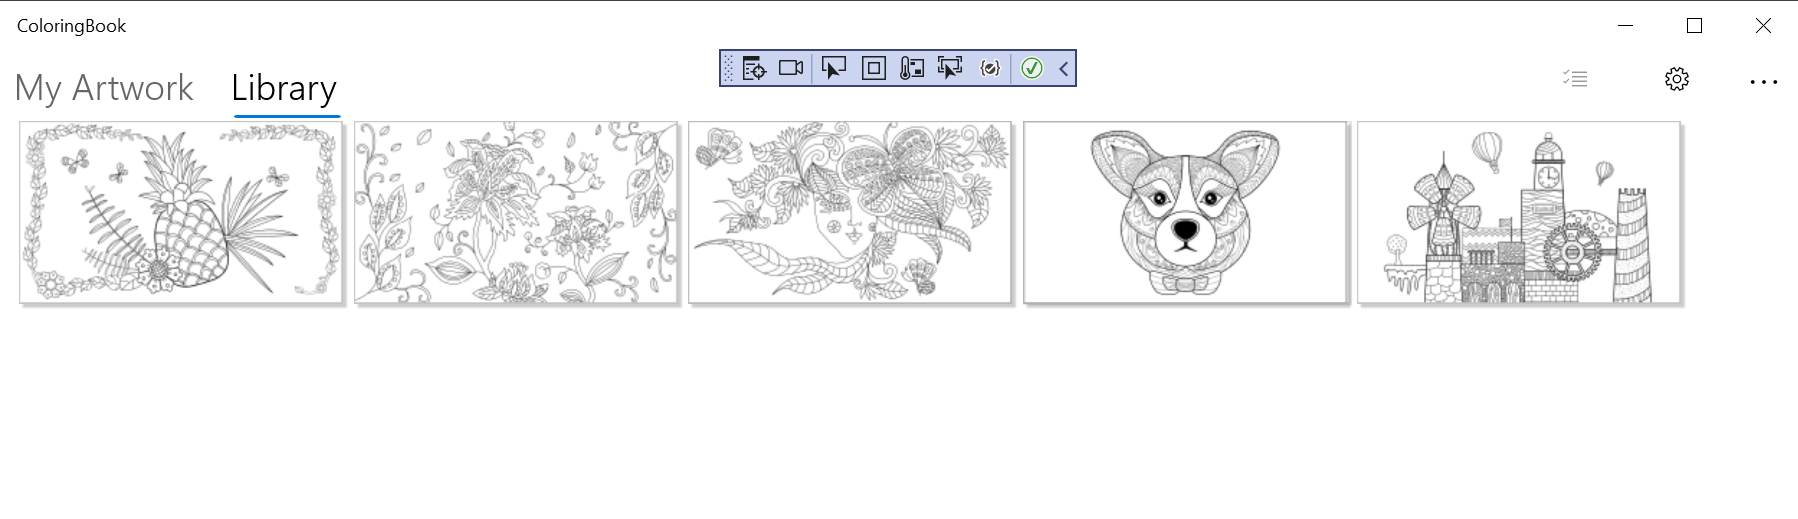 Screenshot of the Windows coloring book page selection screen. It displays coloring book pages the user may select to color.